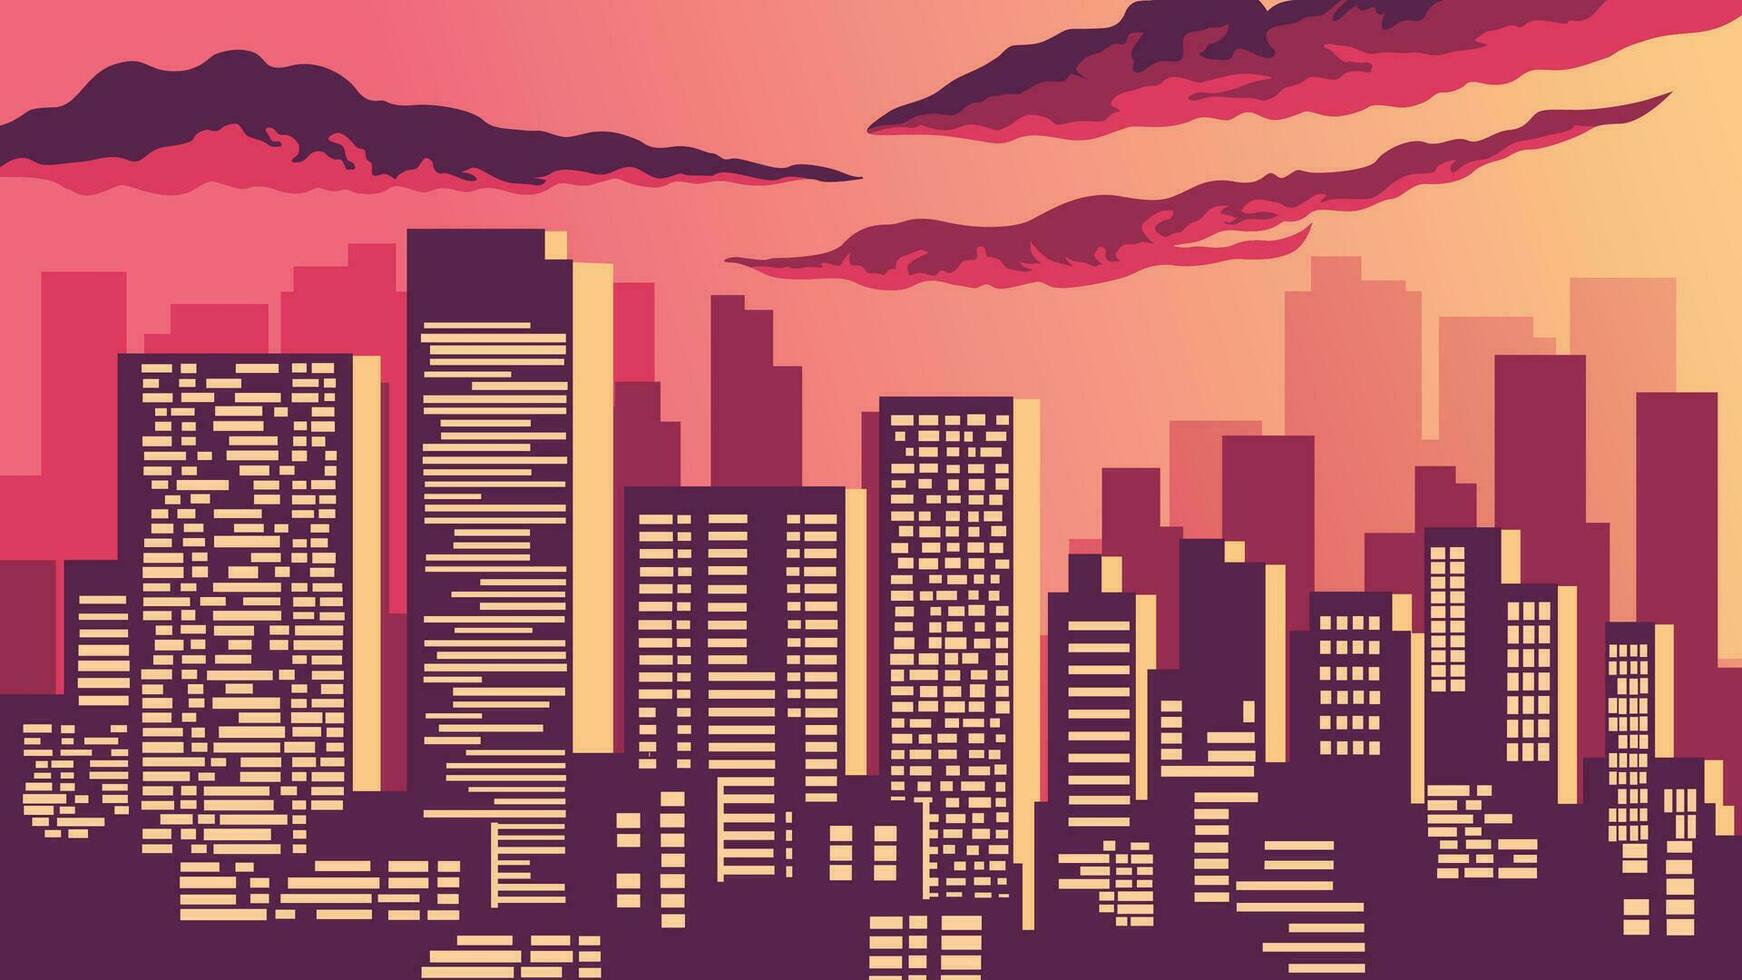 An illustration of the city atmosphere at night in pink and yellow vector